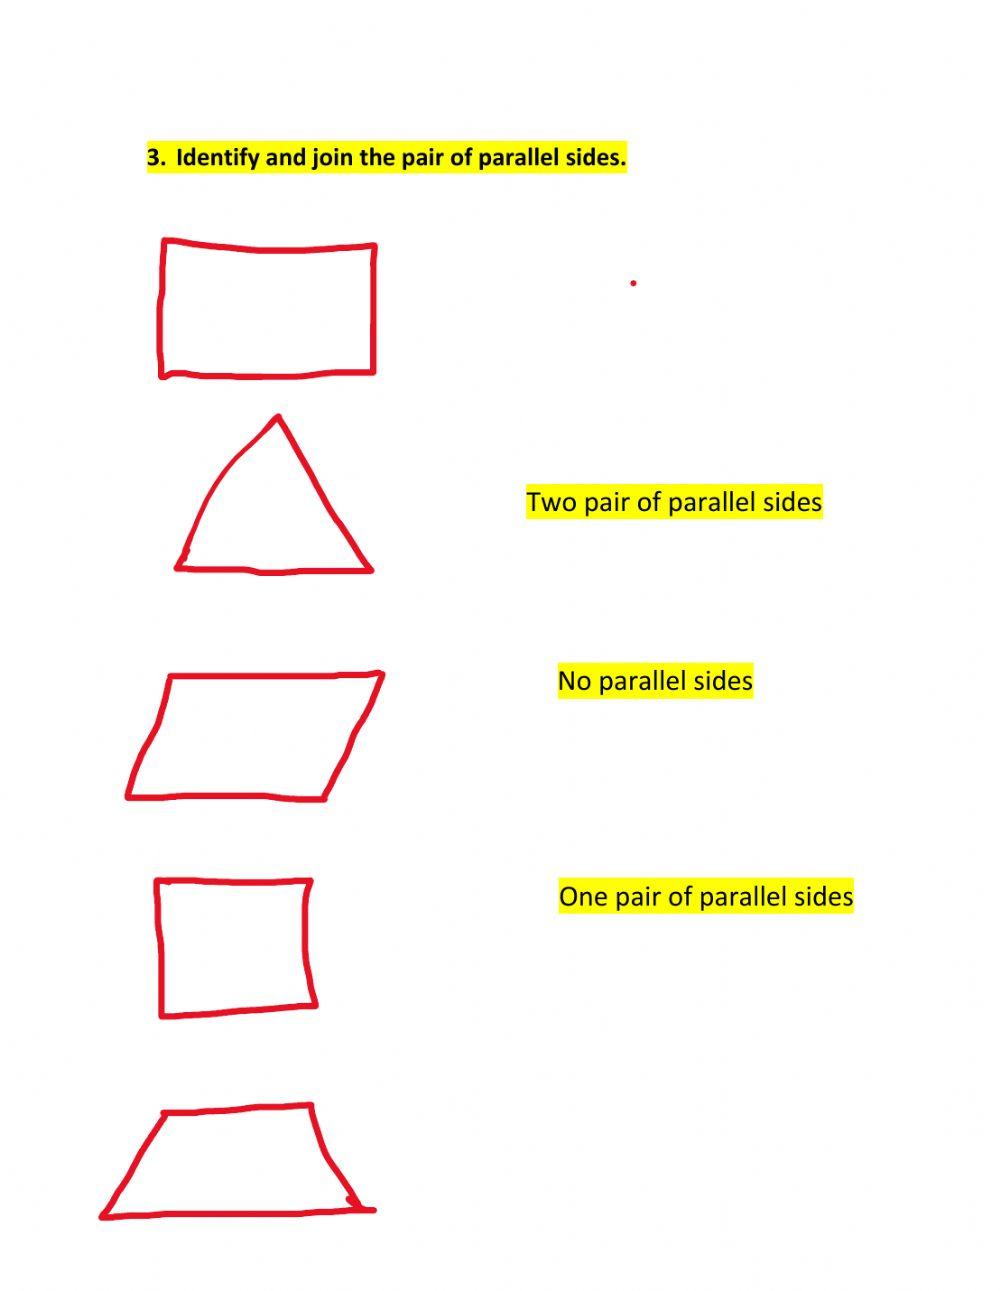 Review of polygons